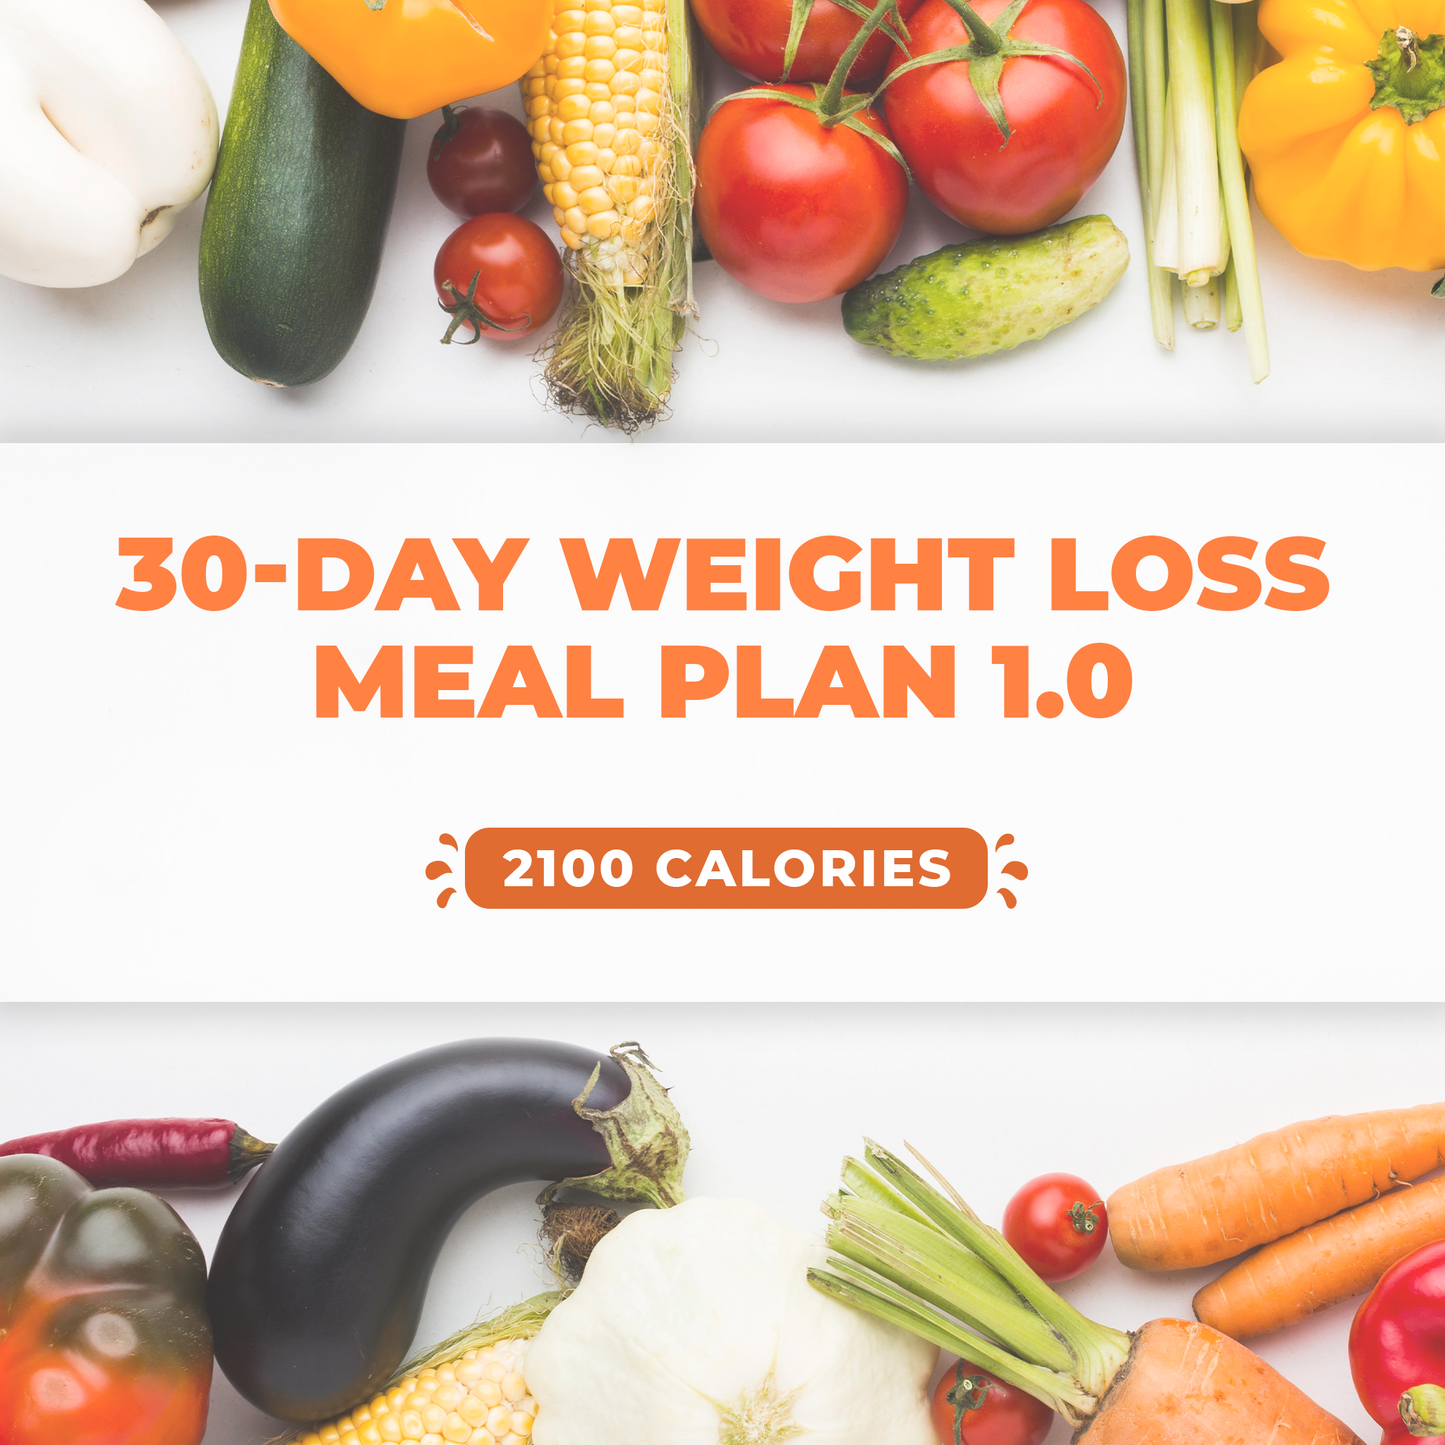 30-Day Weight Loss Meal Plan 1.0 (2100 Calories)